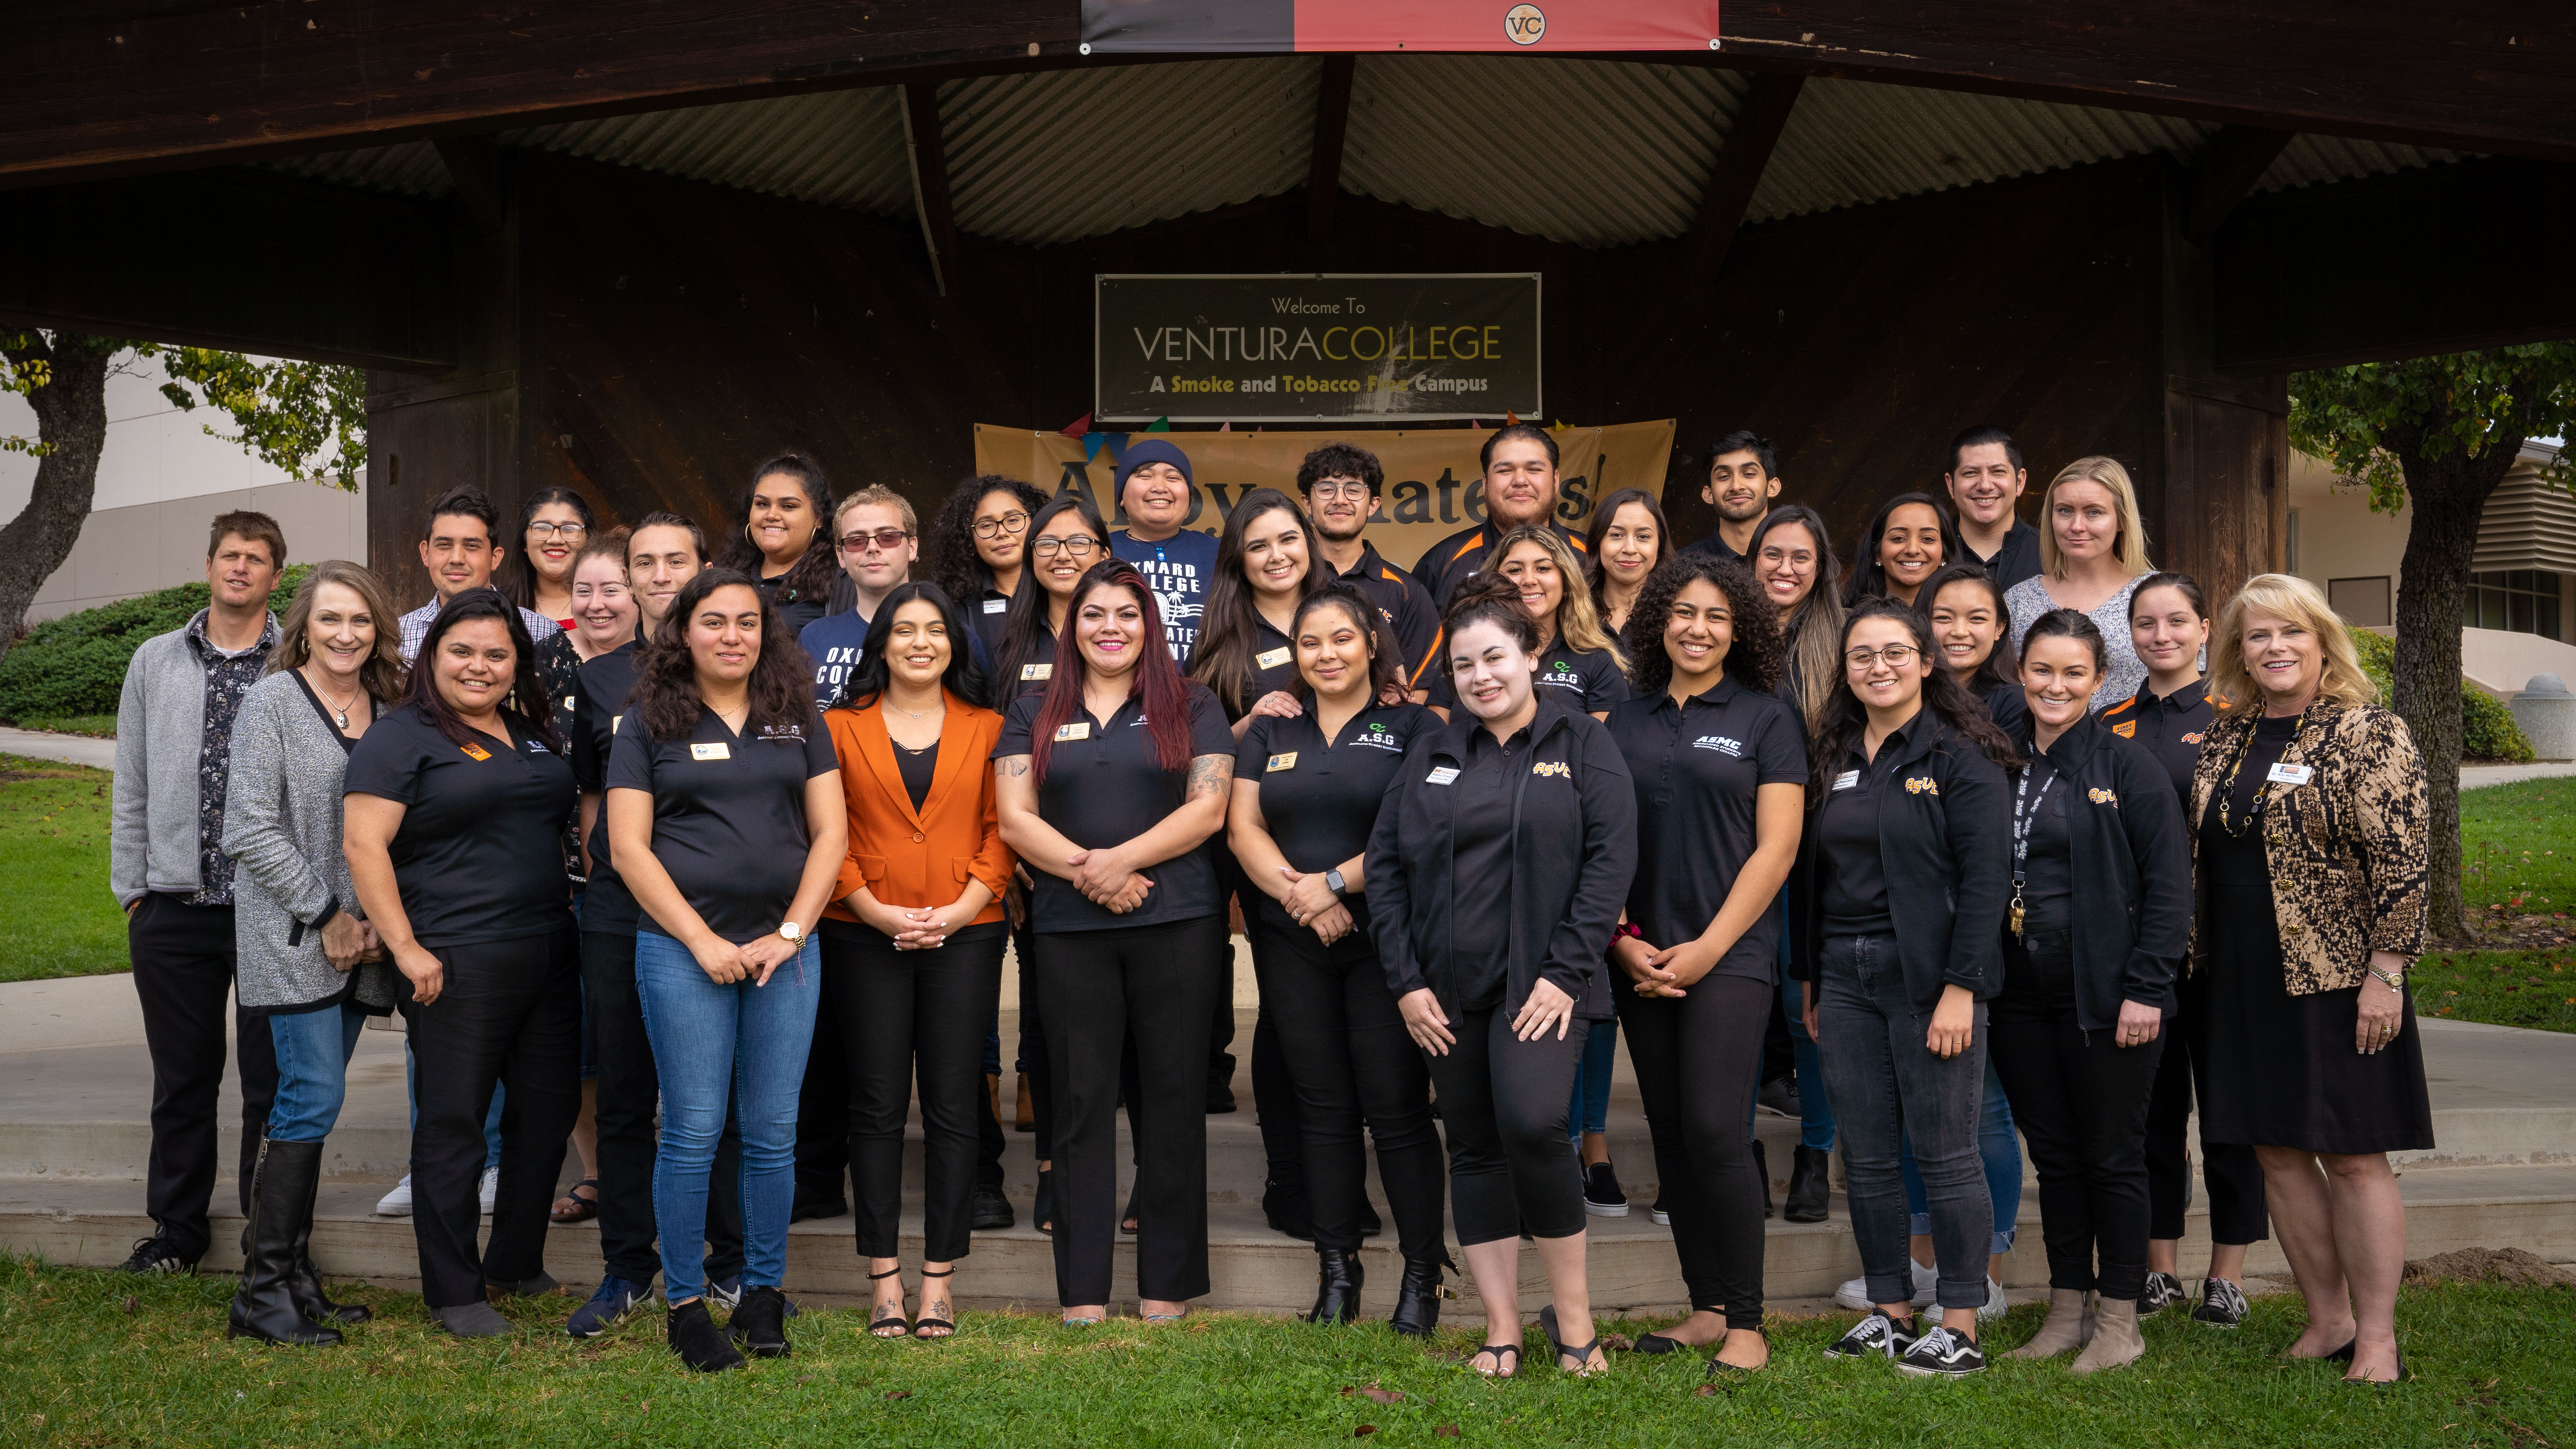 College Student Leaders Group Photo at Ventura College